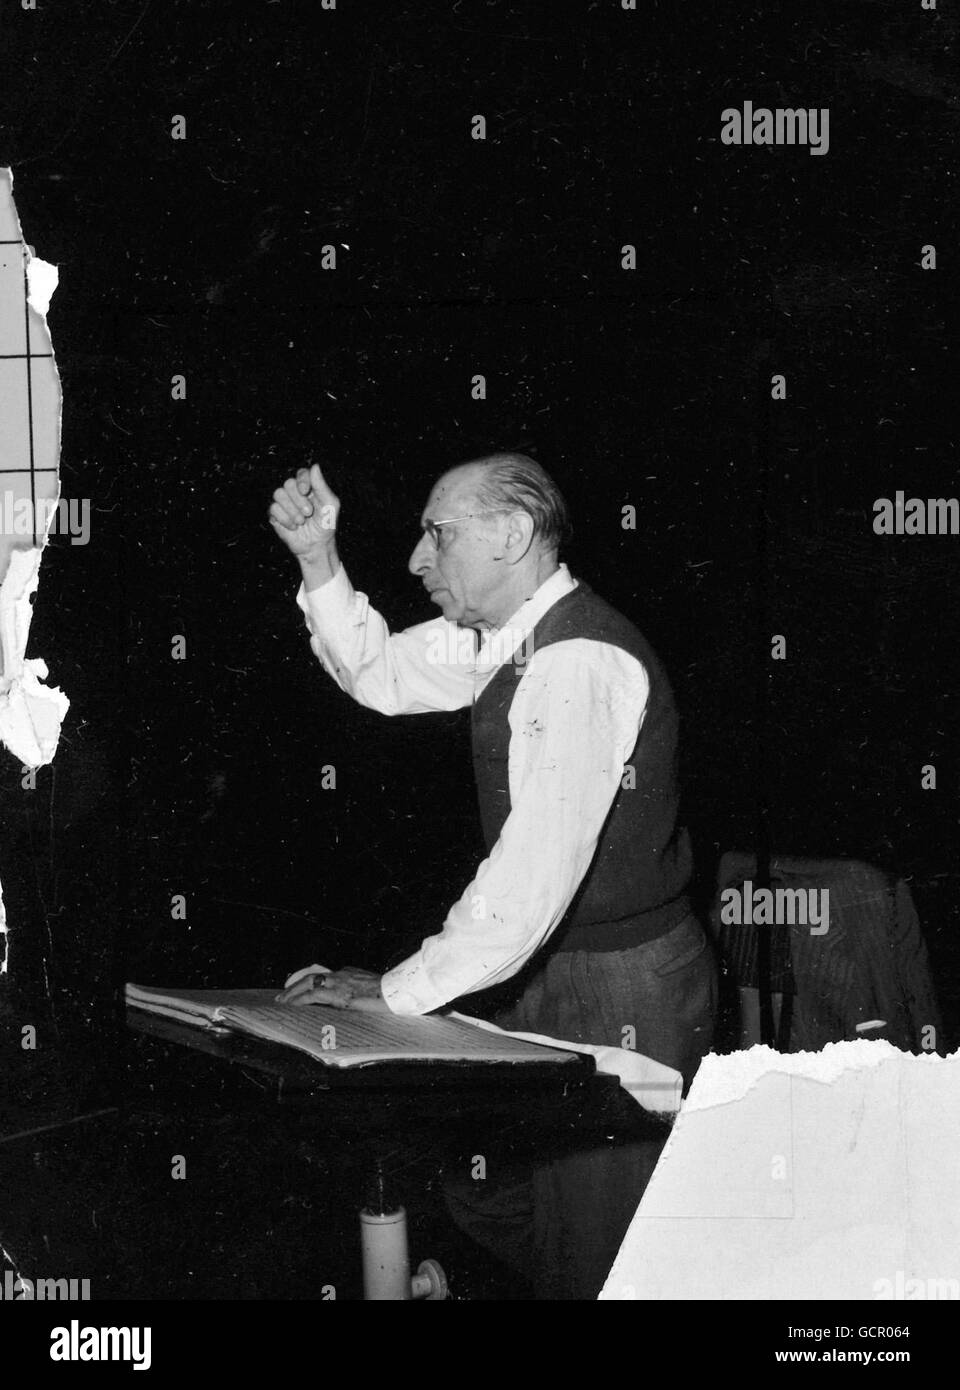 Russian-born composer Igor Stravinsky, who died in New York on April 6th 1971 aged 88, is pictured as he rehearsed the Royal Philharmonic Orchestra at the Royal Festival Hall, London, for a concert of his own works in Circa Date 1954. Stock Photo